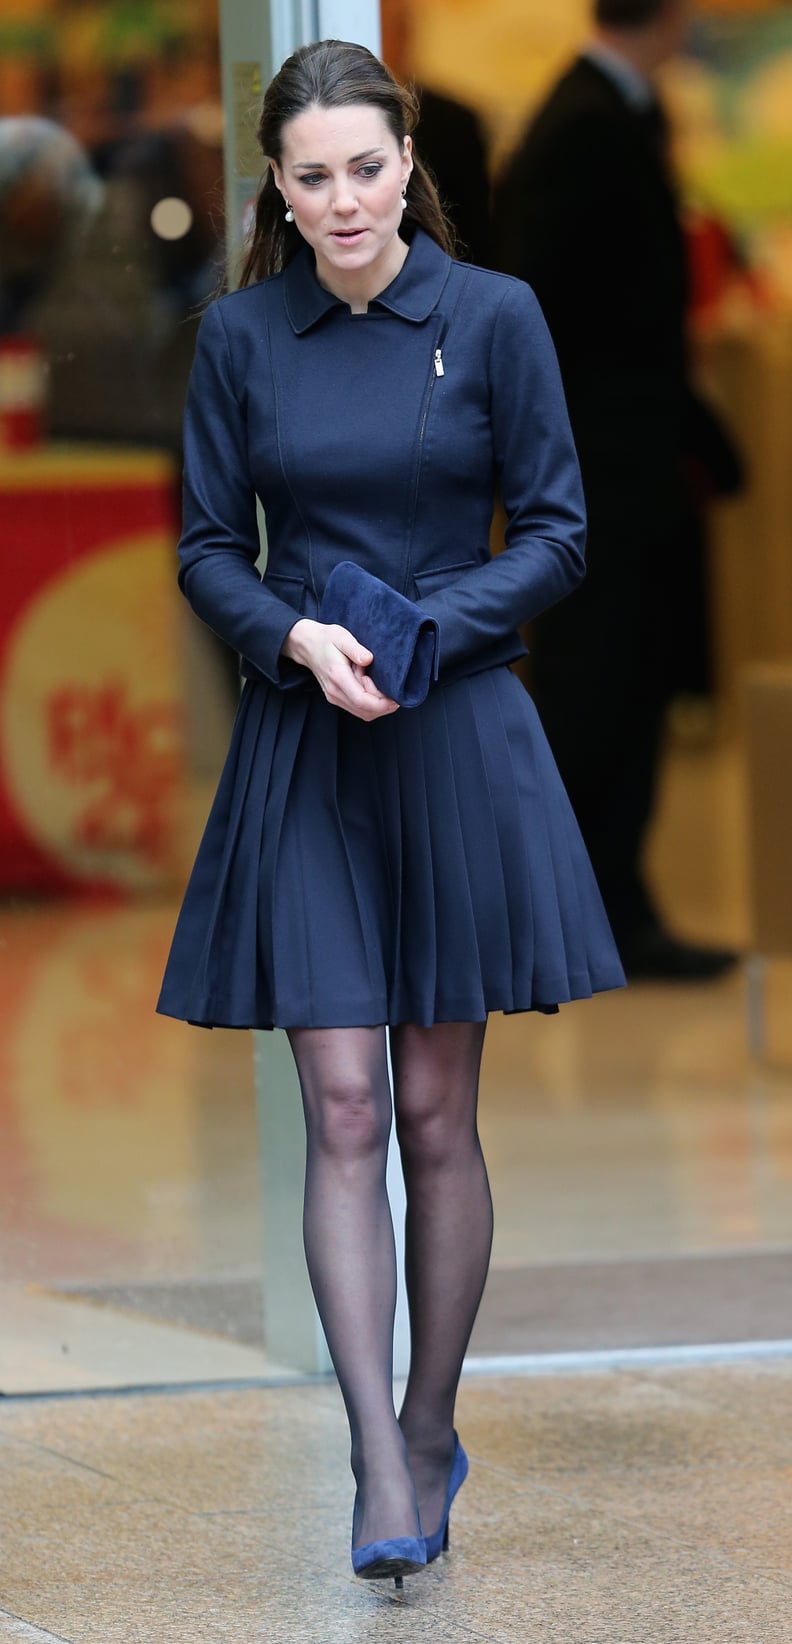 Kate Middleton in a Navy Dress